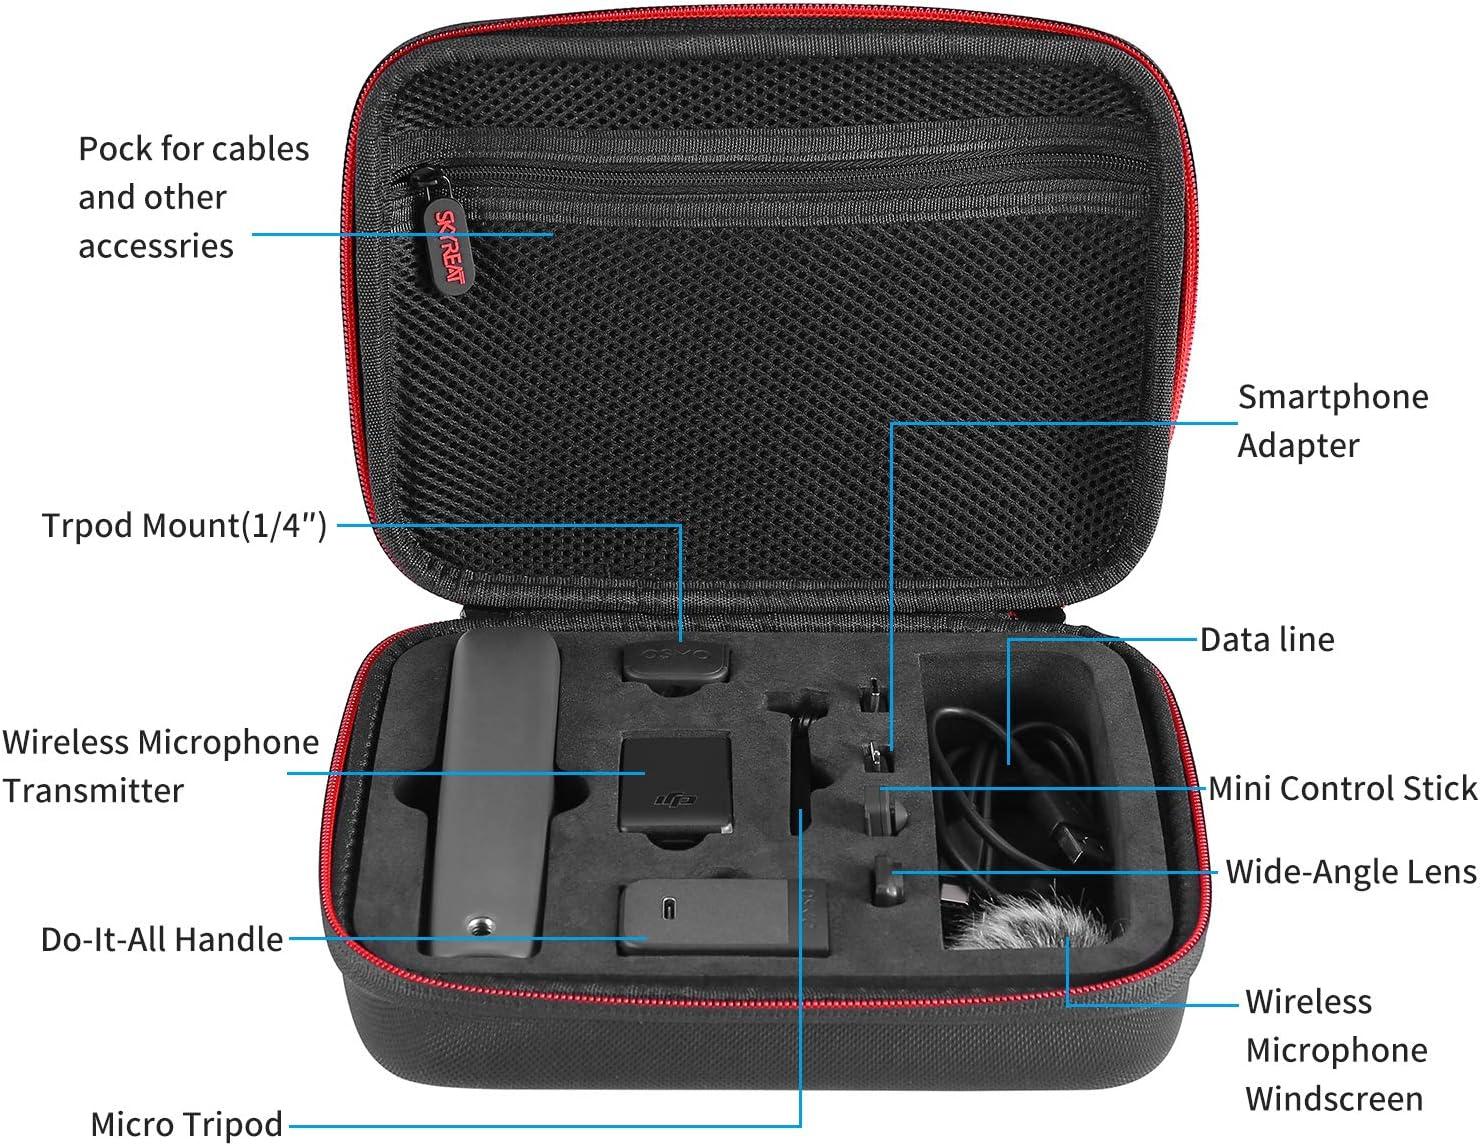 Skyreat Osmo Pocket 2 Case,Portable Travel Carry Bag for DJI Pocket 2 Creator  Combo and Accessories